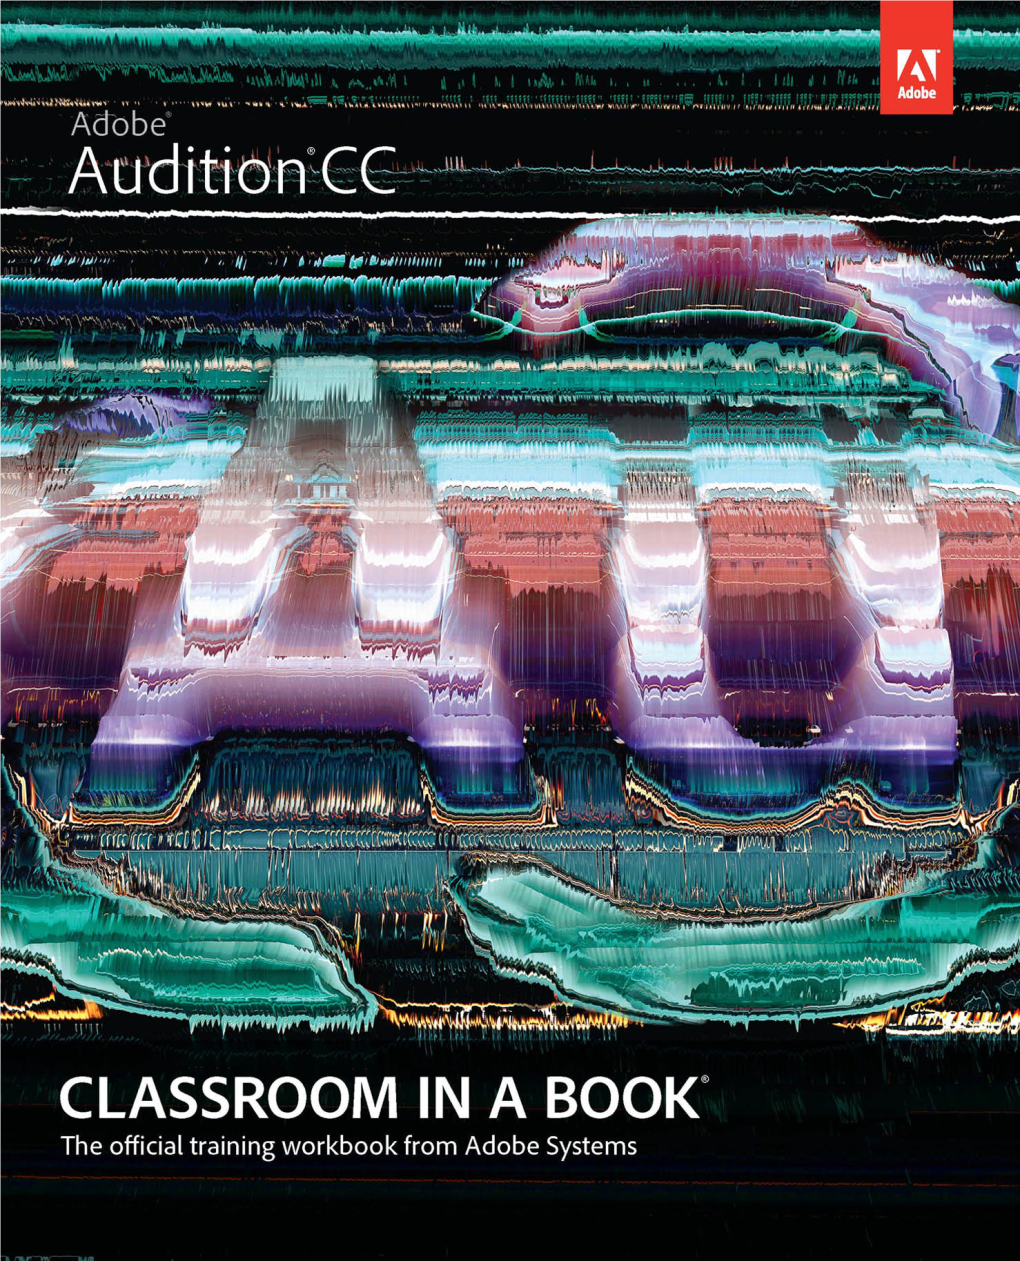 Adobe® Audition® CC Classroom in a Book® © 2013 Adobe Systems Incorporated and Its Licensors